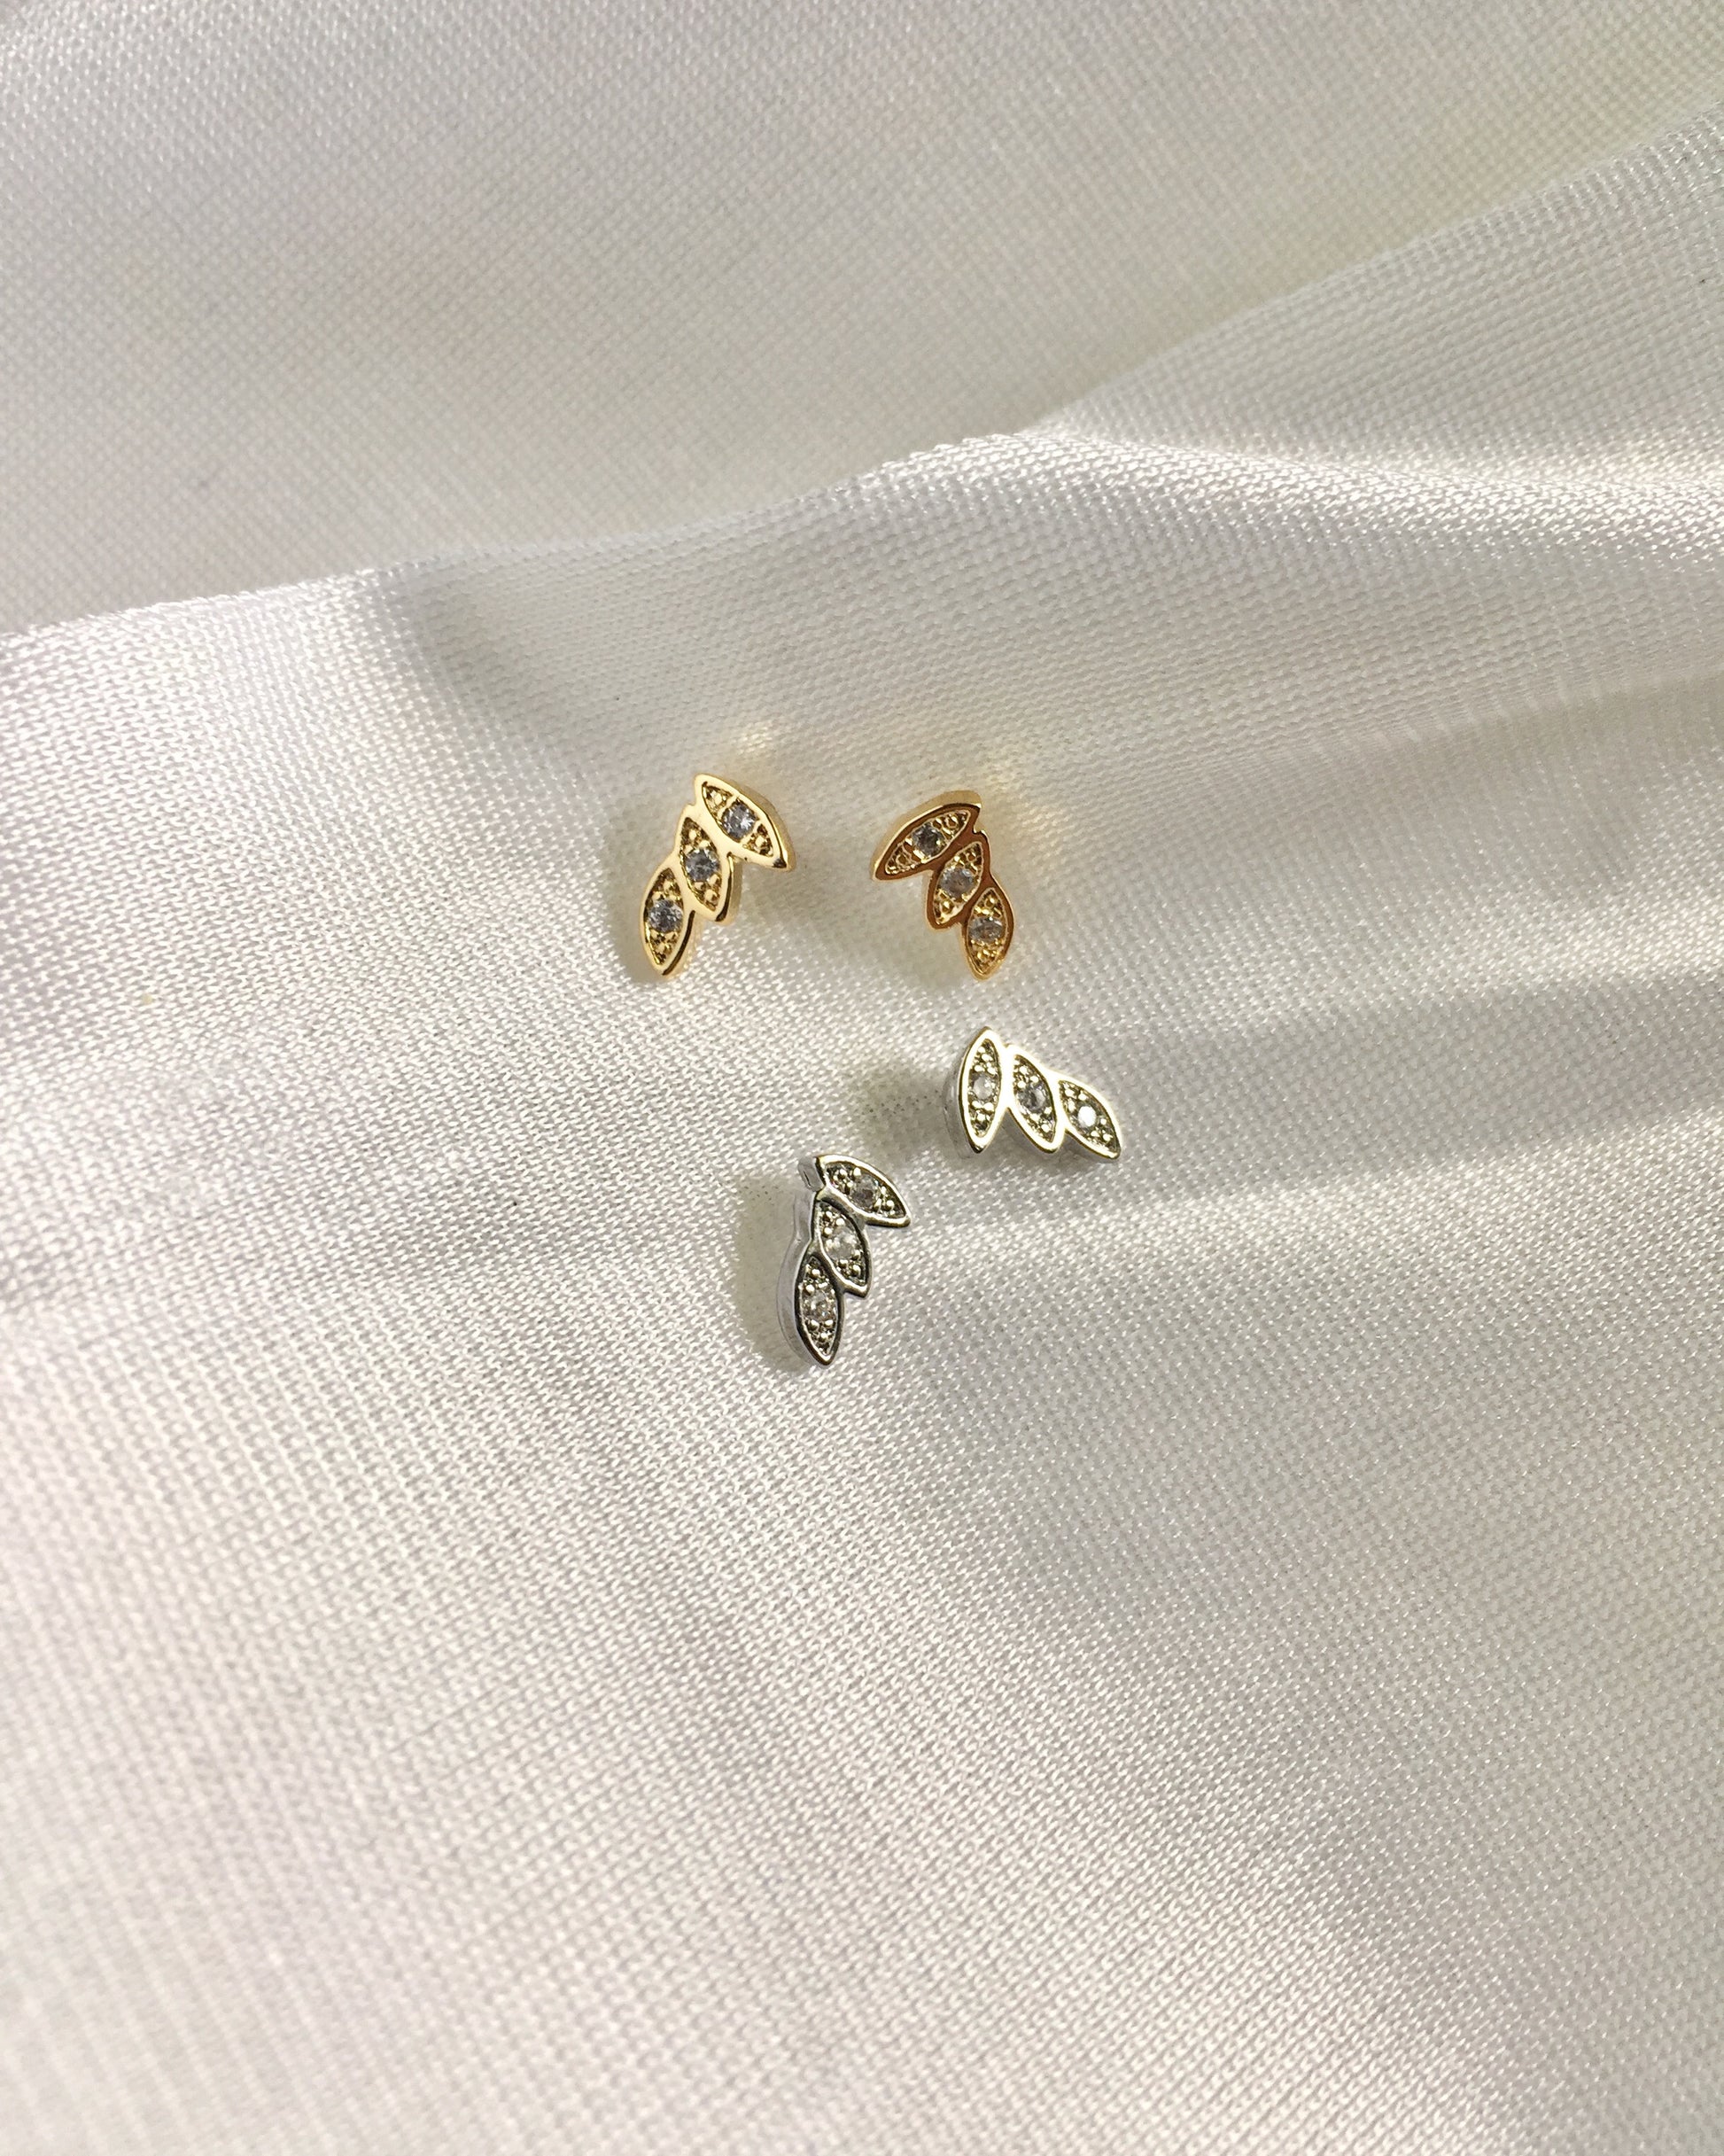 Leaf CZ Stud Earrings in Gold or Silver | Small Delicate Stud Earrings | Dainty Tiny Stud Earrings | IB Jewelry